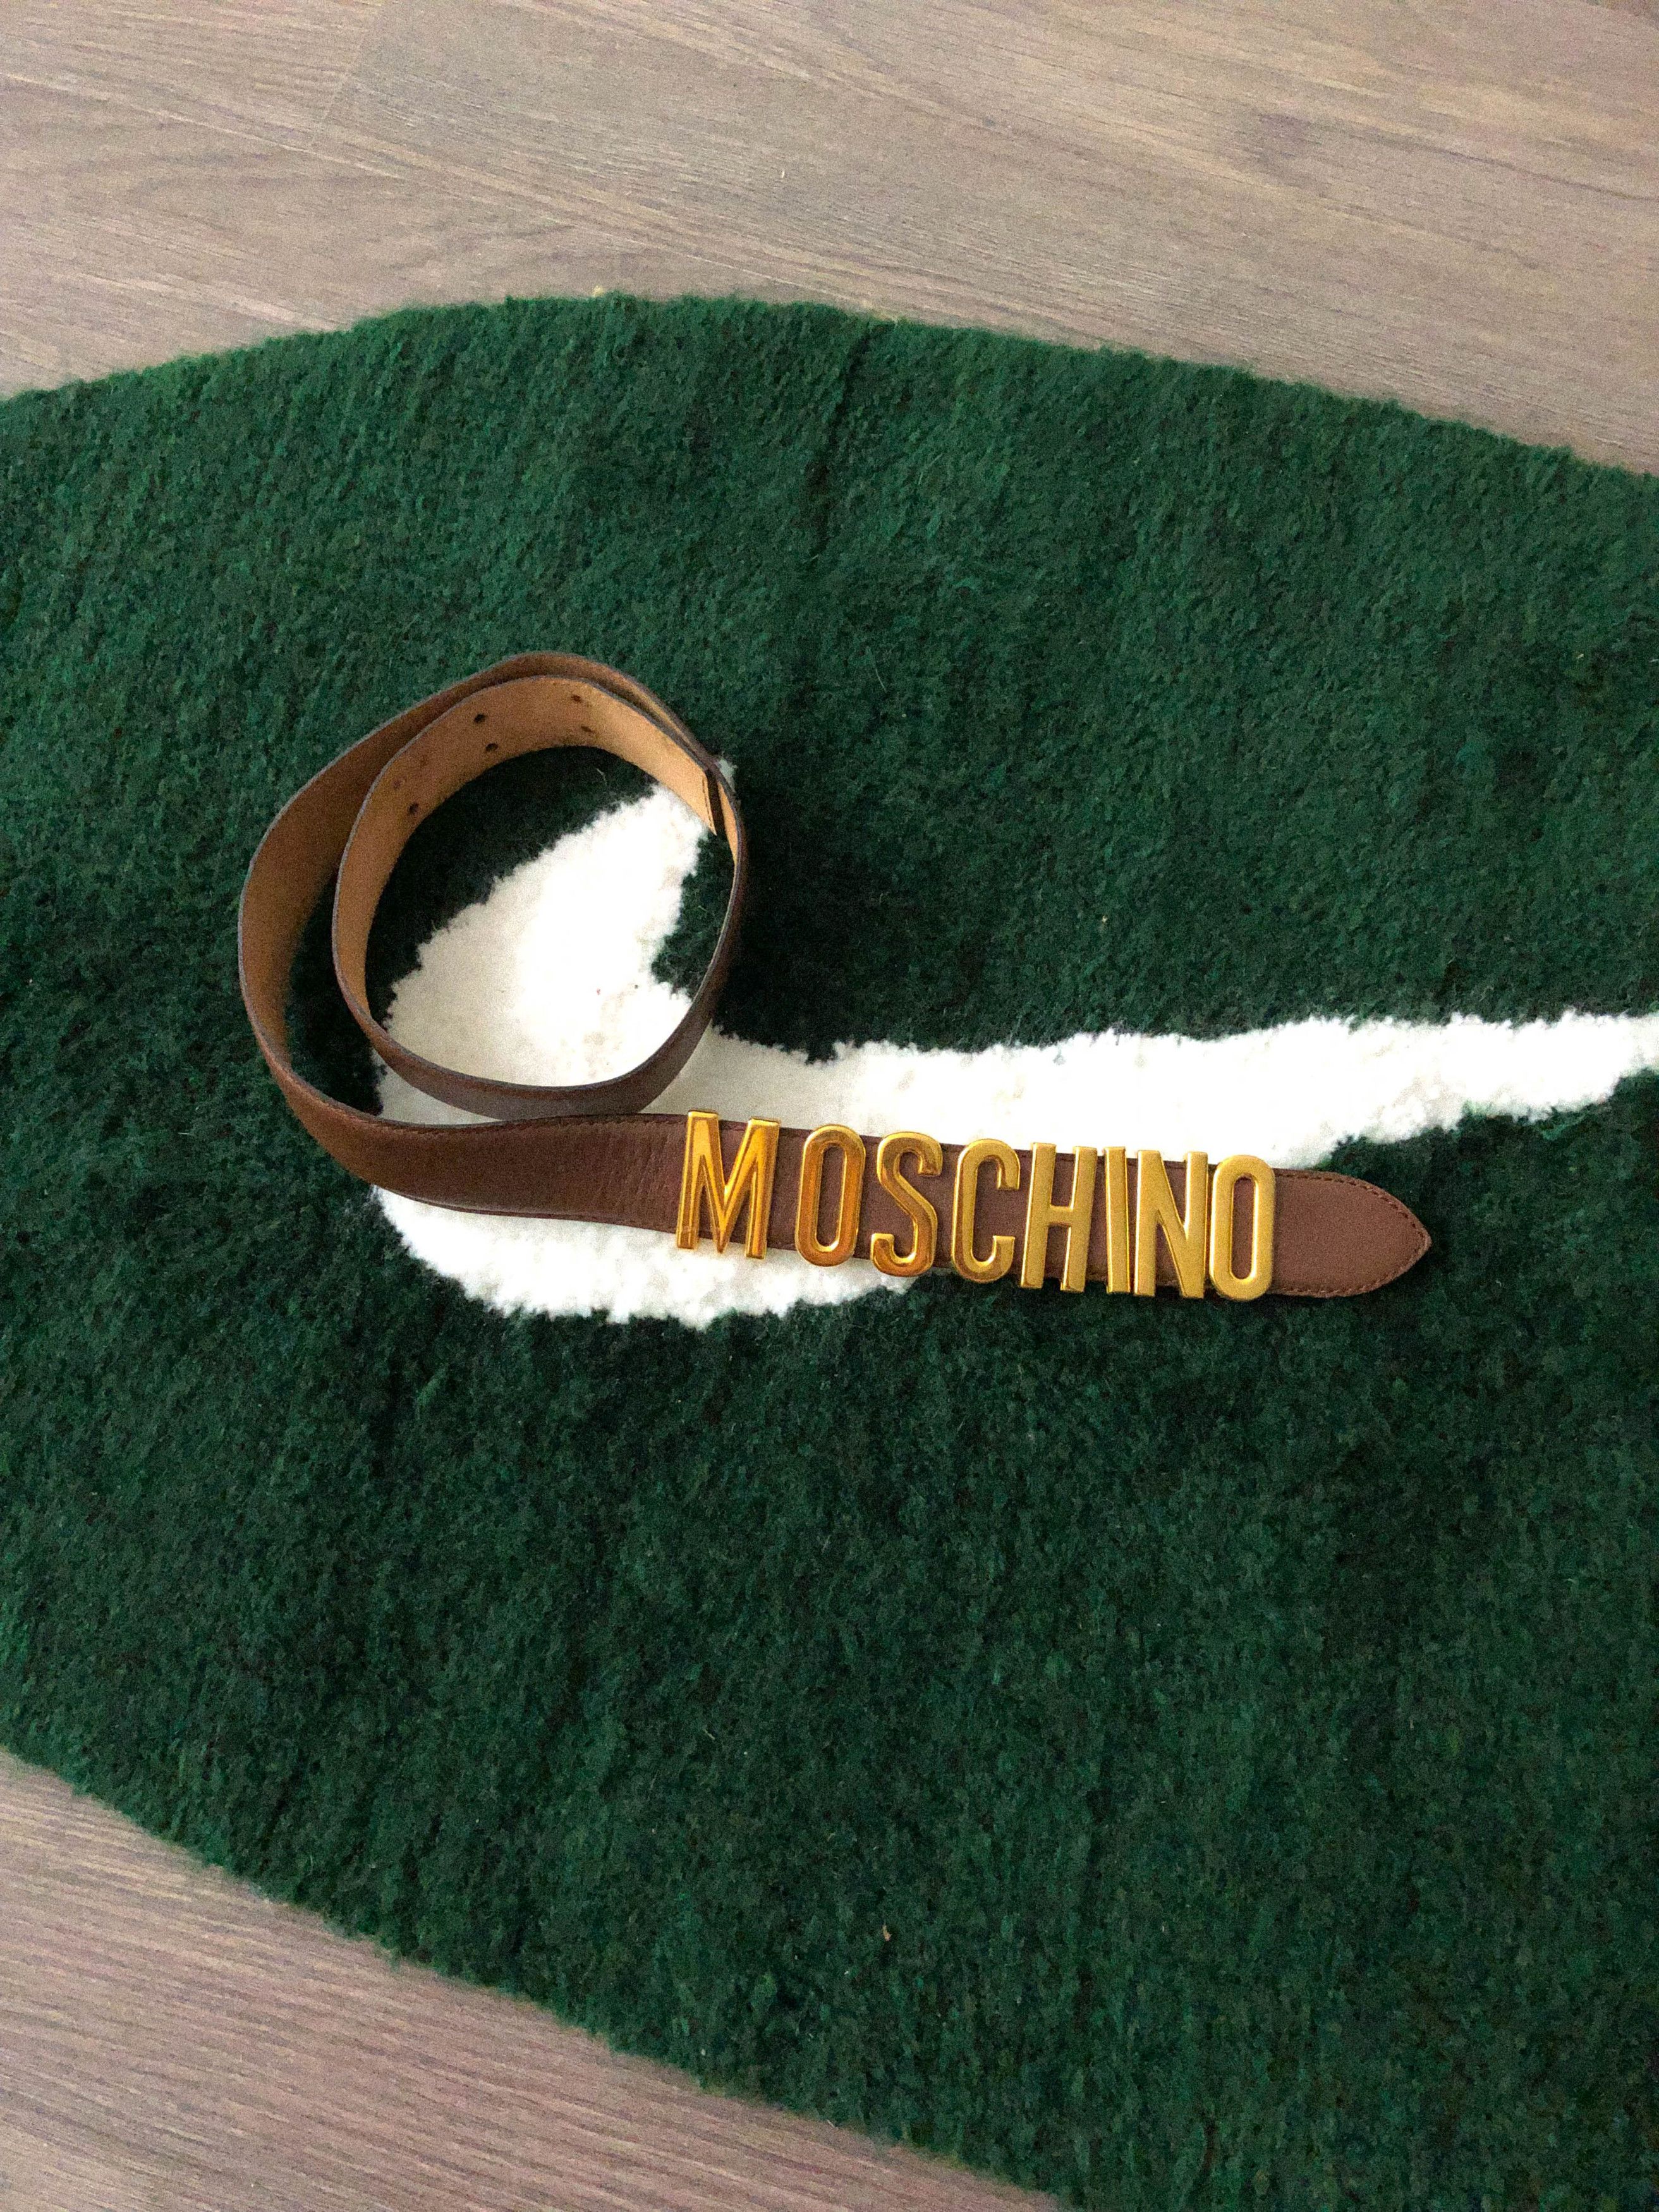 Moschino RARE Iconic Vintage Moschino Belt True Grail Size ONE SIZE - 1 Preview